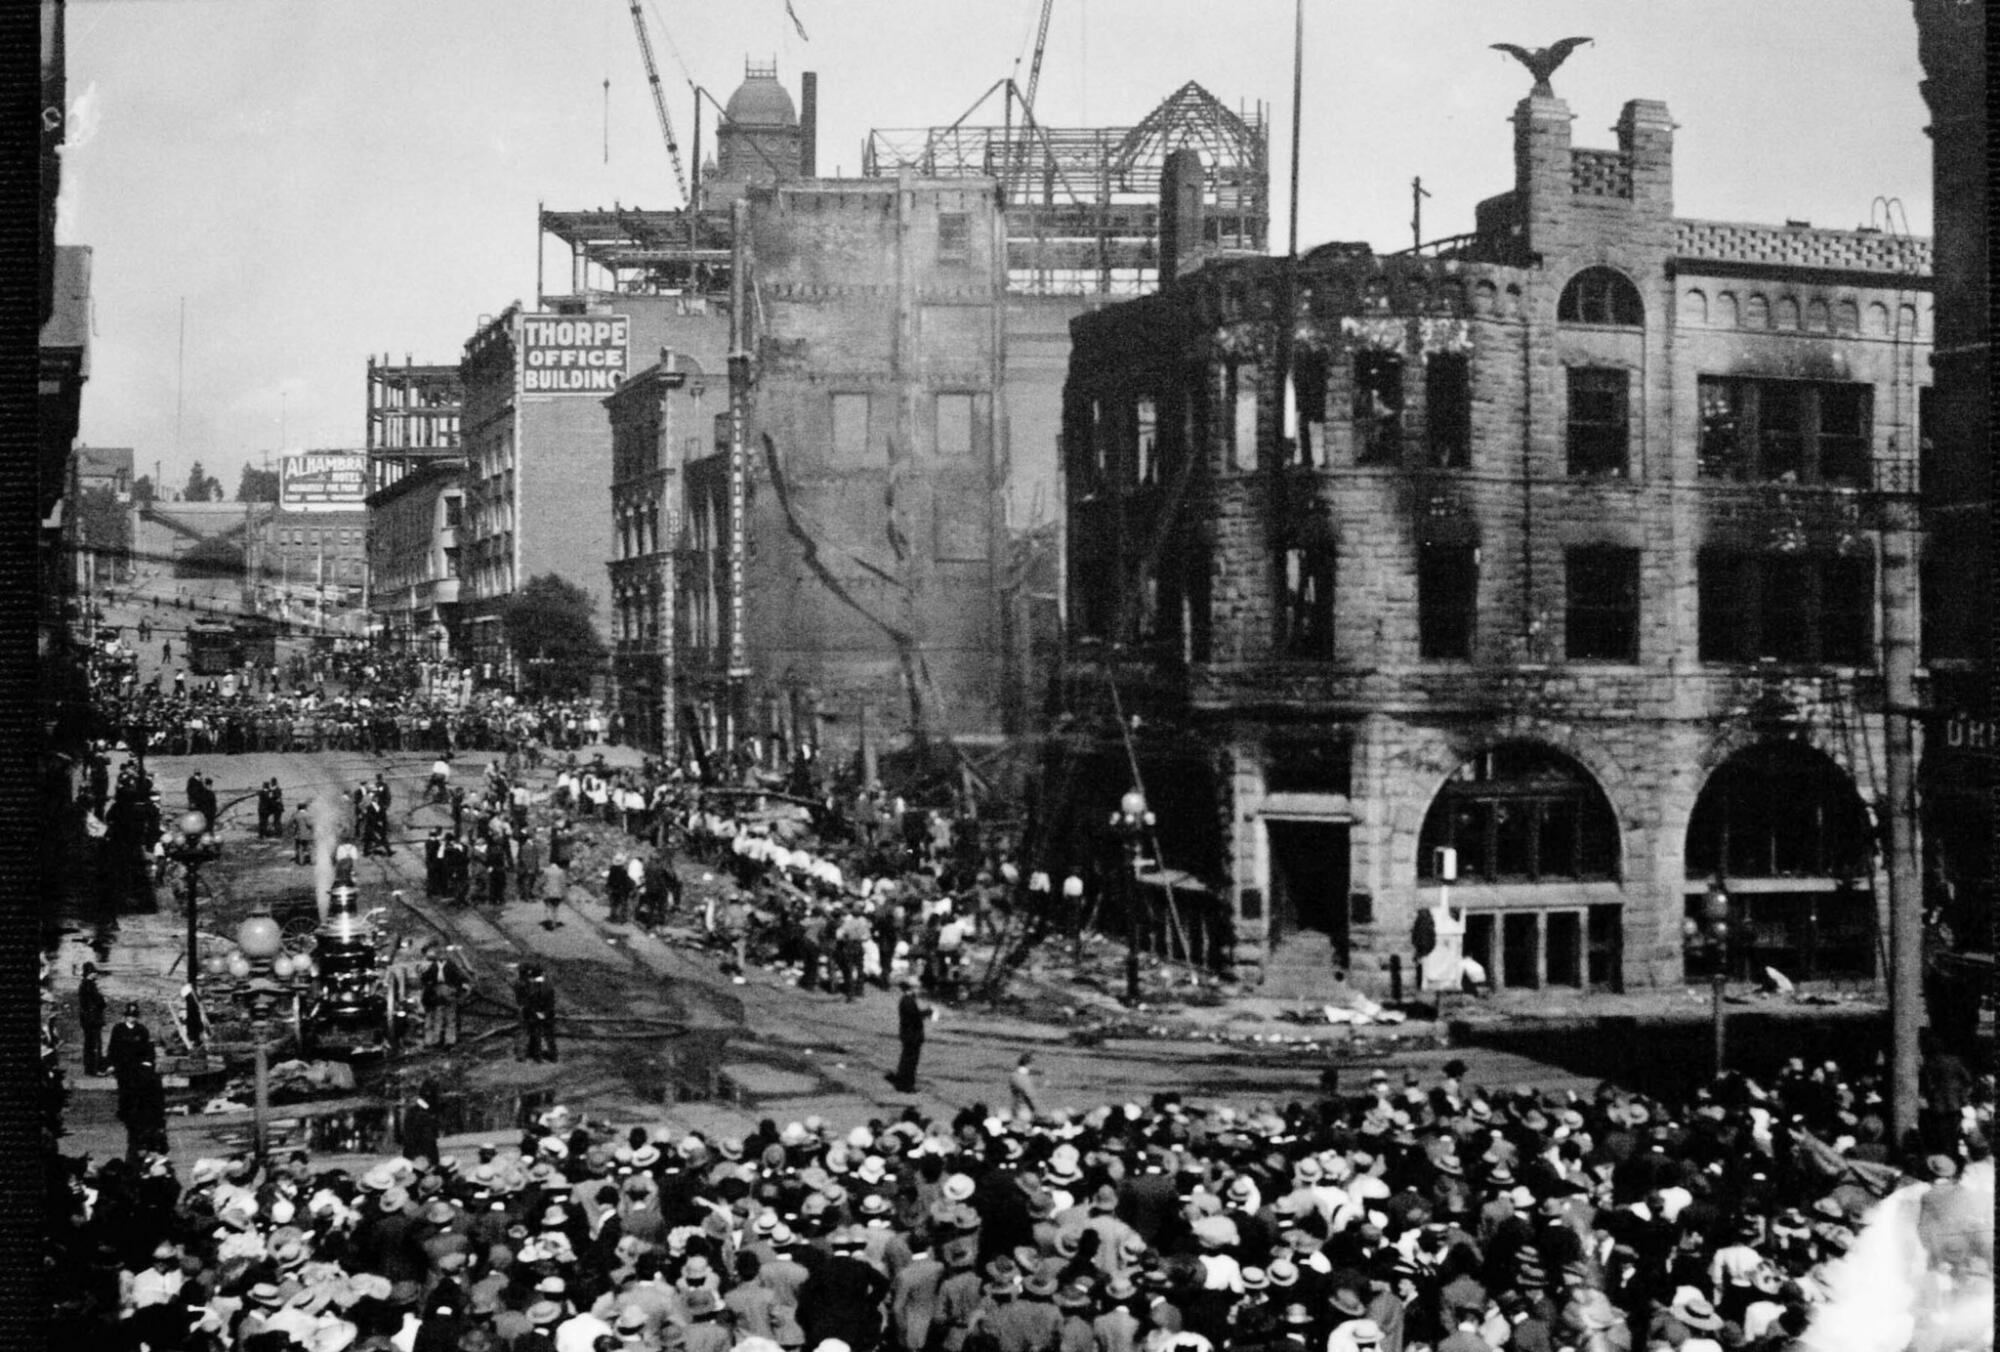 A black-and-white photo of scores of people standing across the street from a charred building with dark, blown-out windows